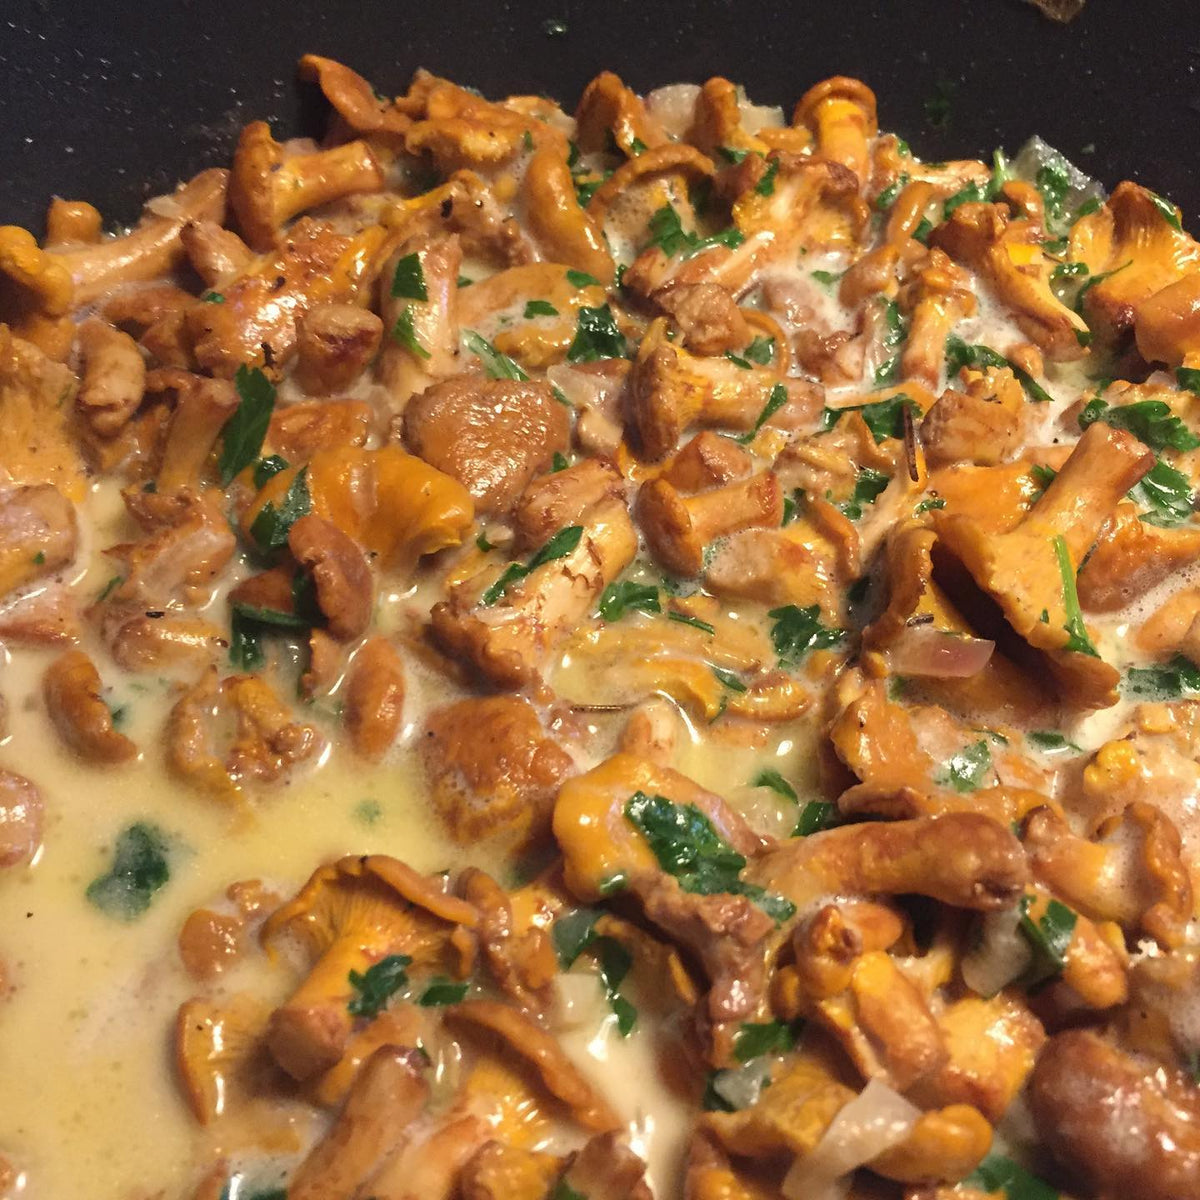 Our absolute FAVE chanterelle mushroom recipe Pacific Wild Pick